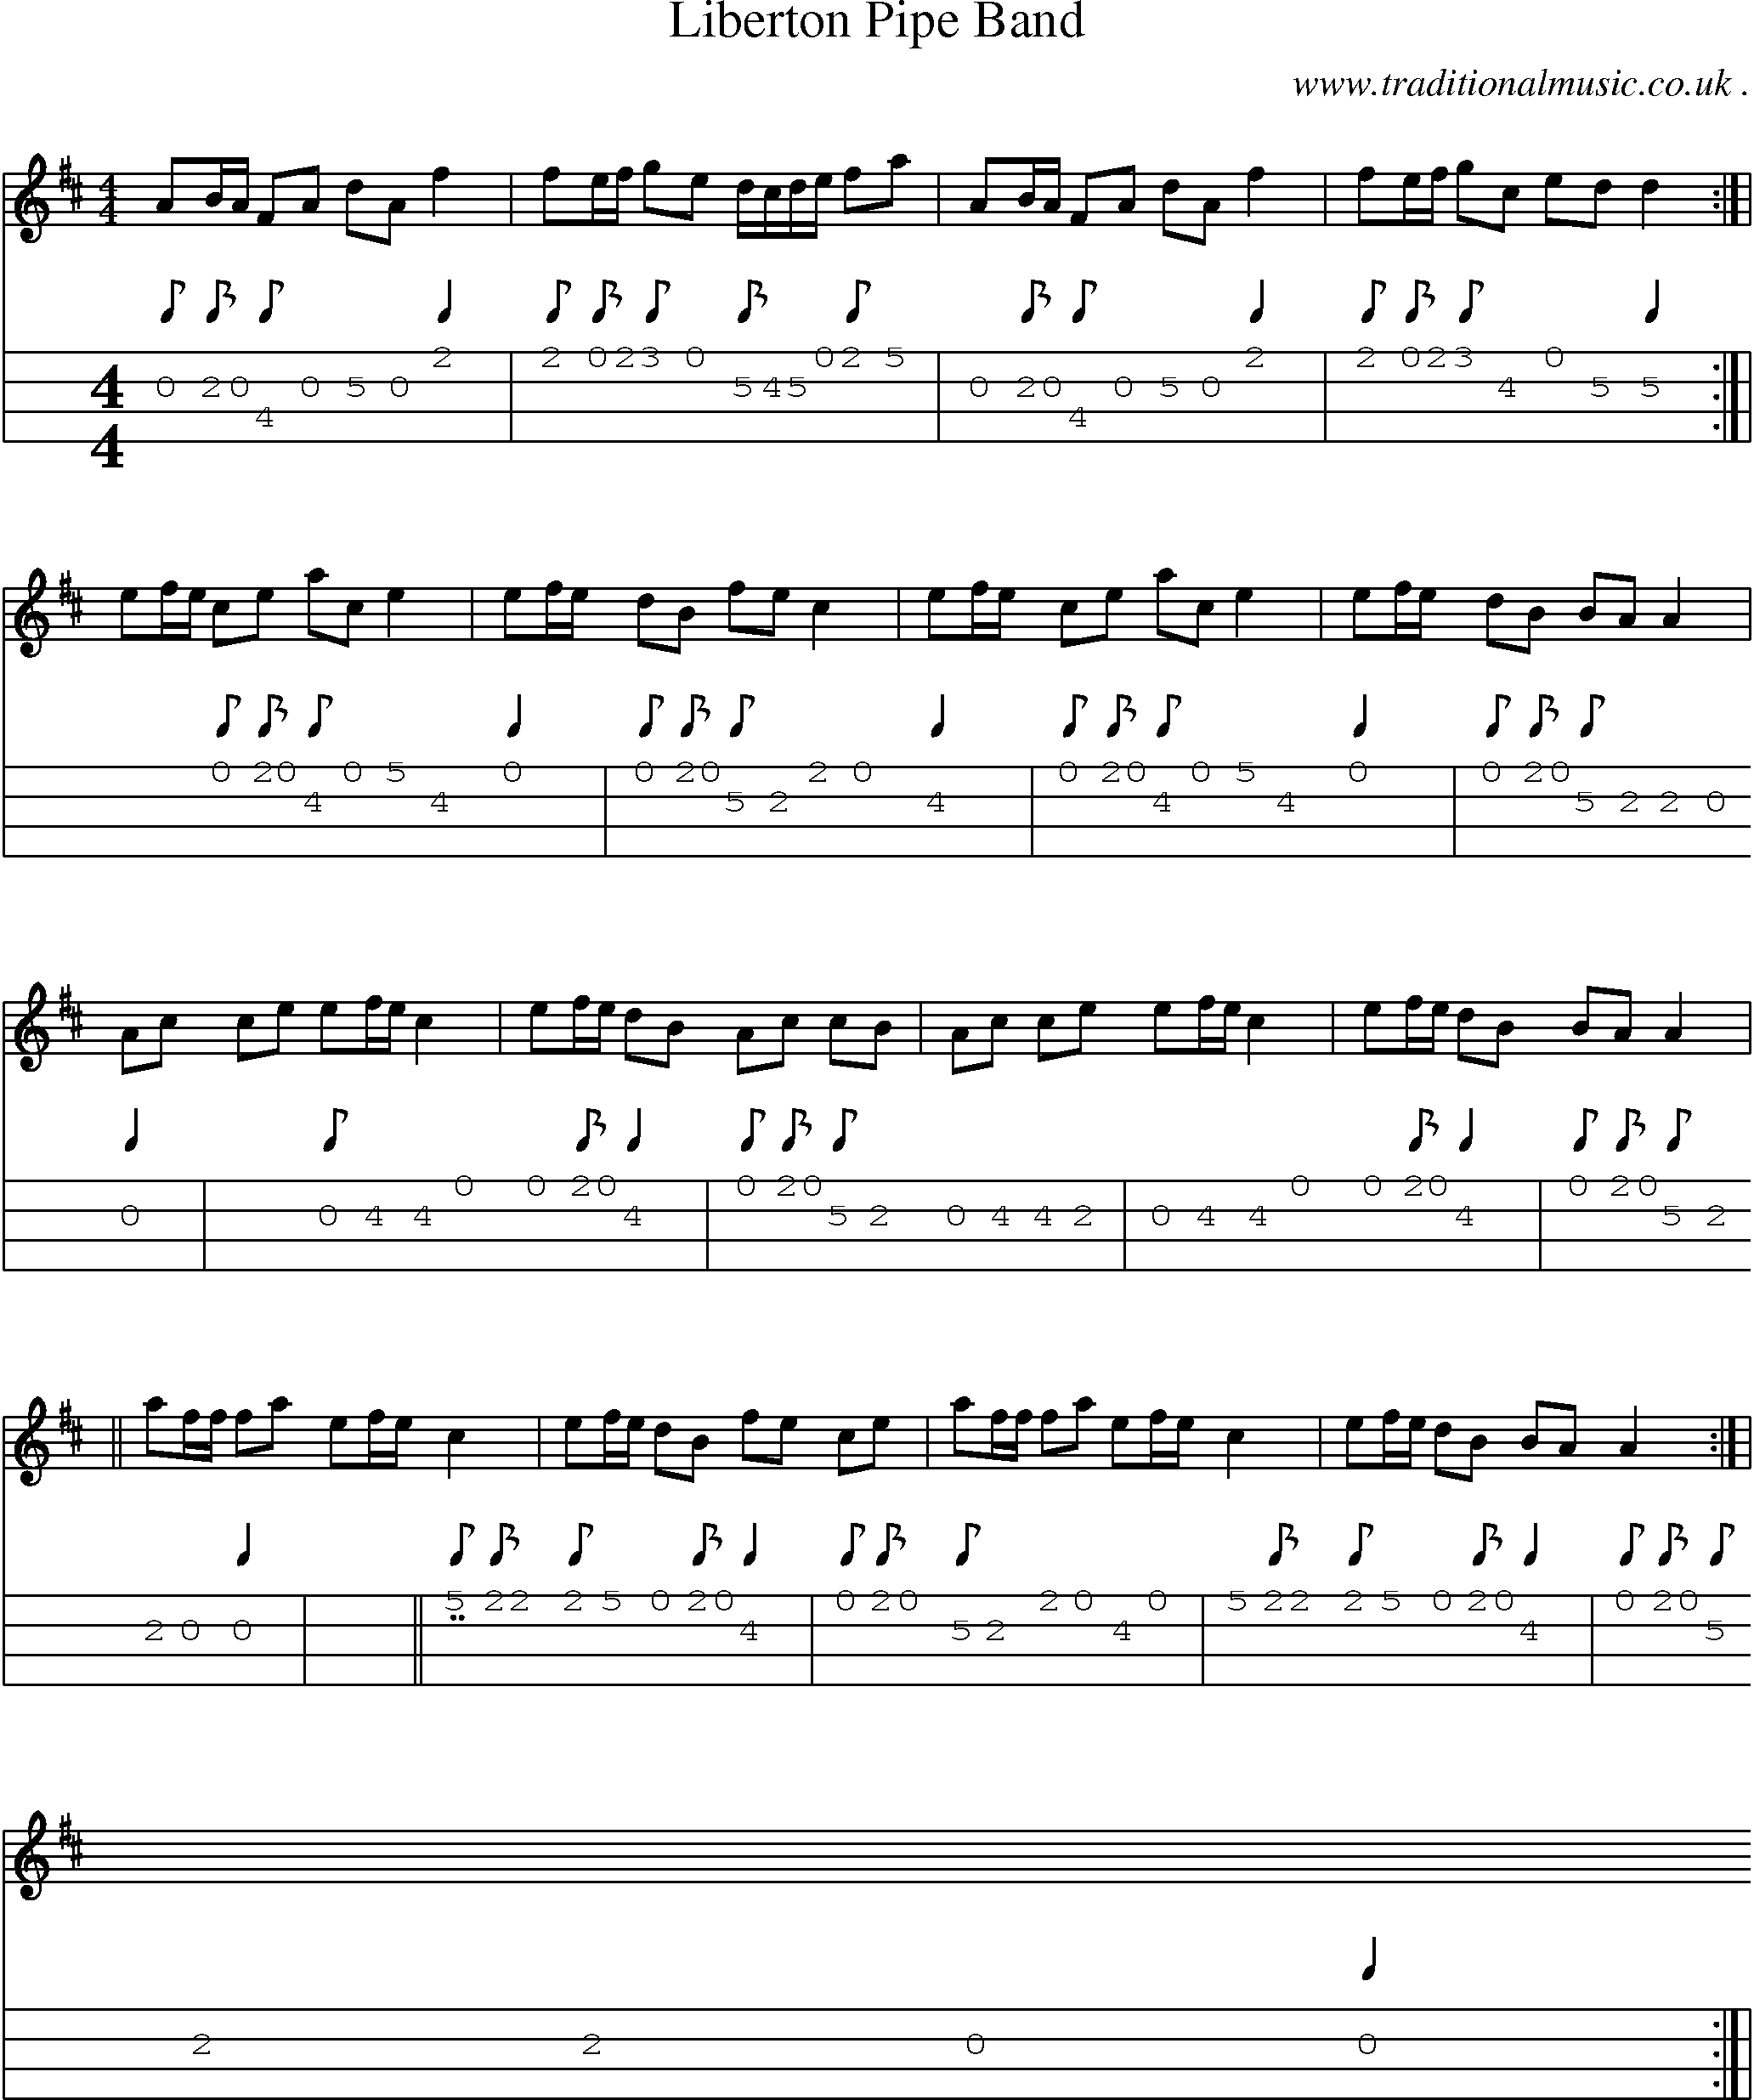 Sheet-music  score, Chords and Mandolin Tabs for Liberton Pipe Band